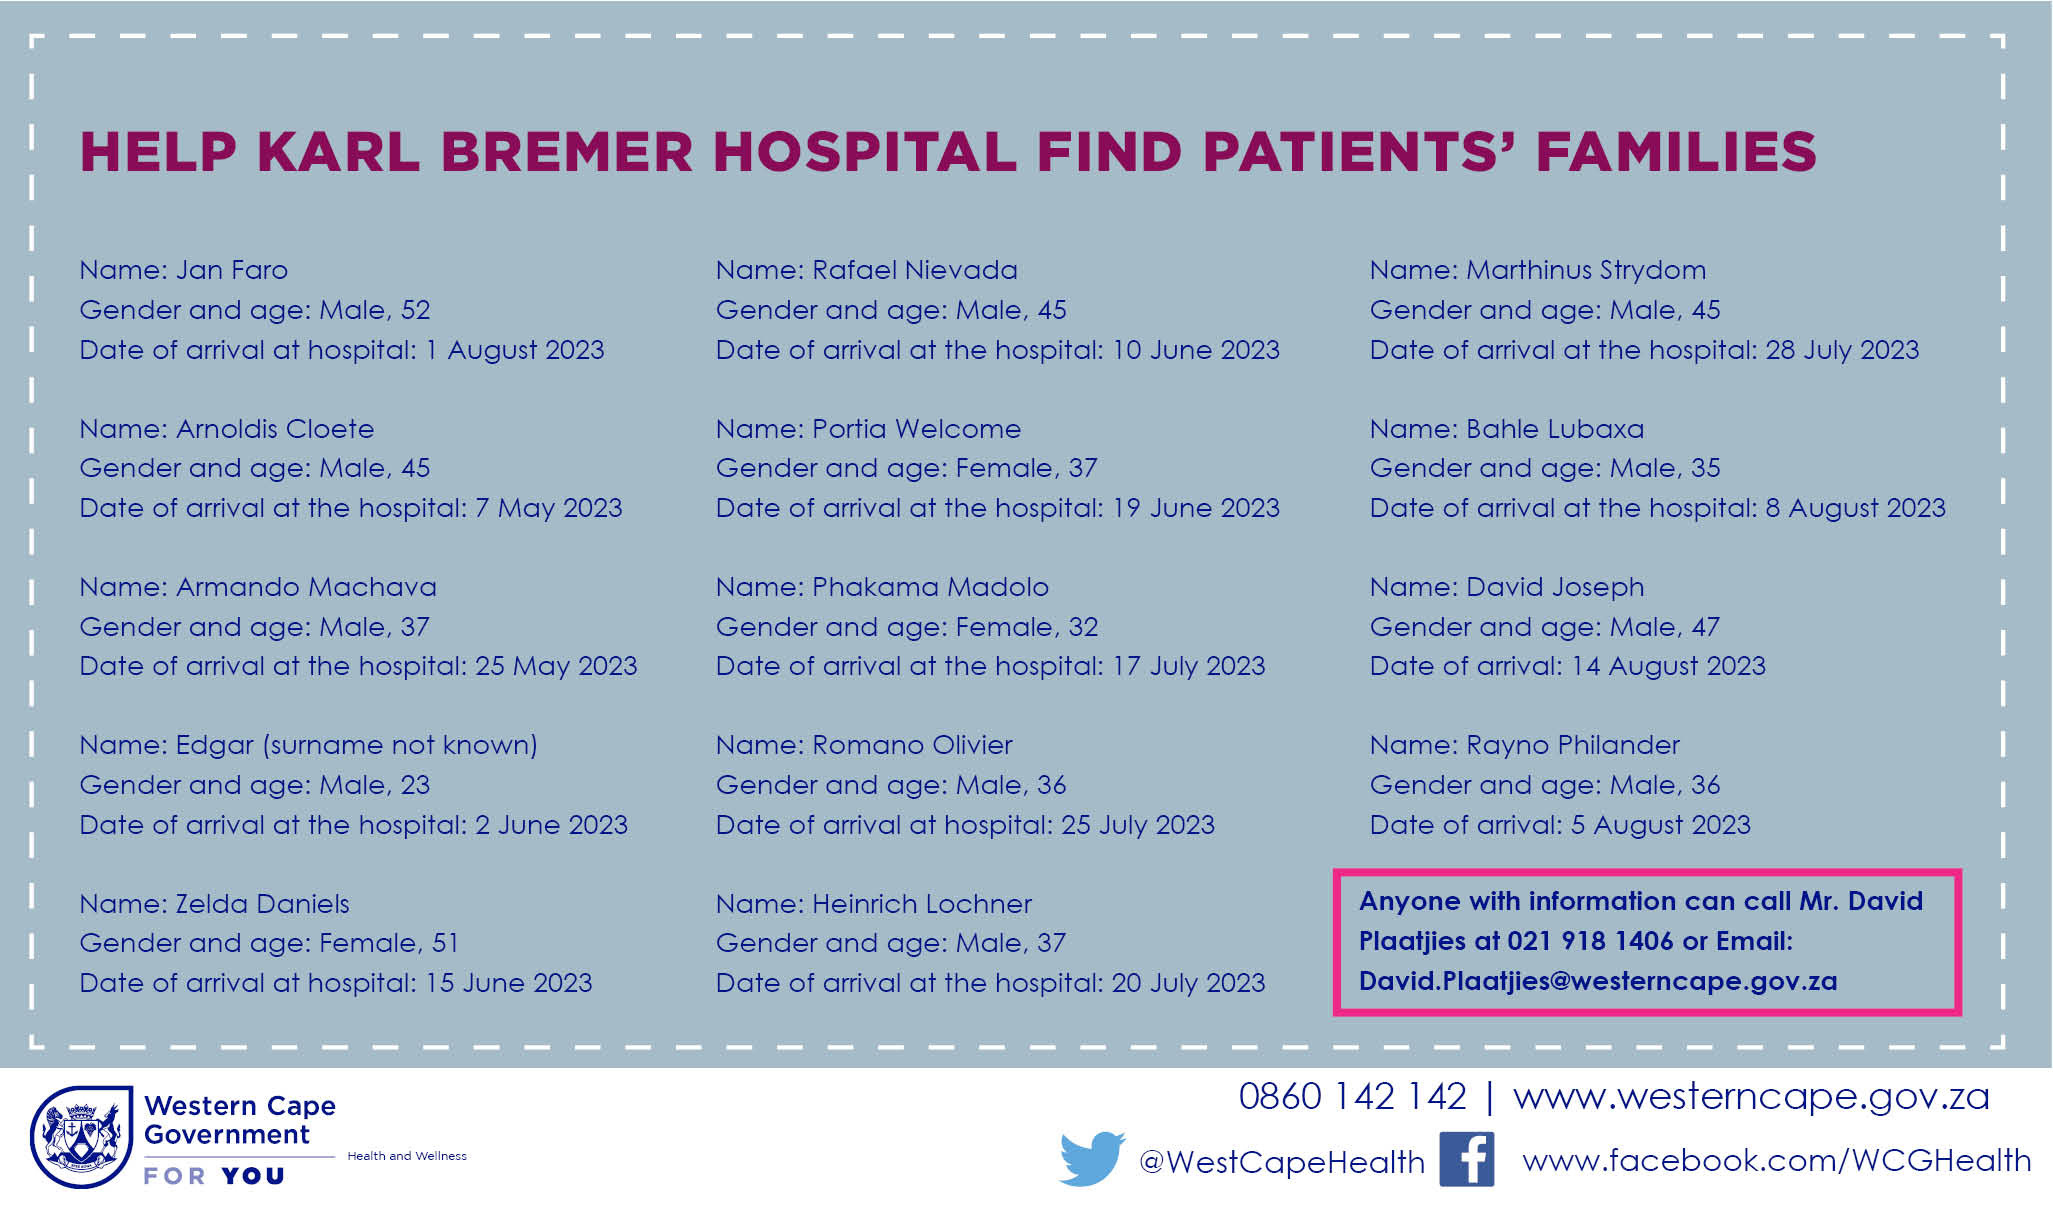 Please help Karl Bremer Hospital to find the families of these patients.